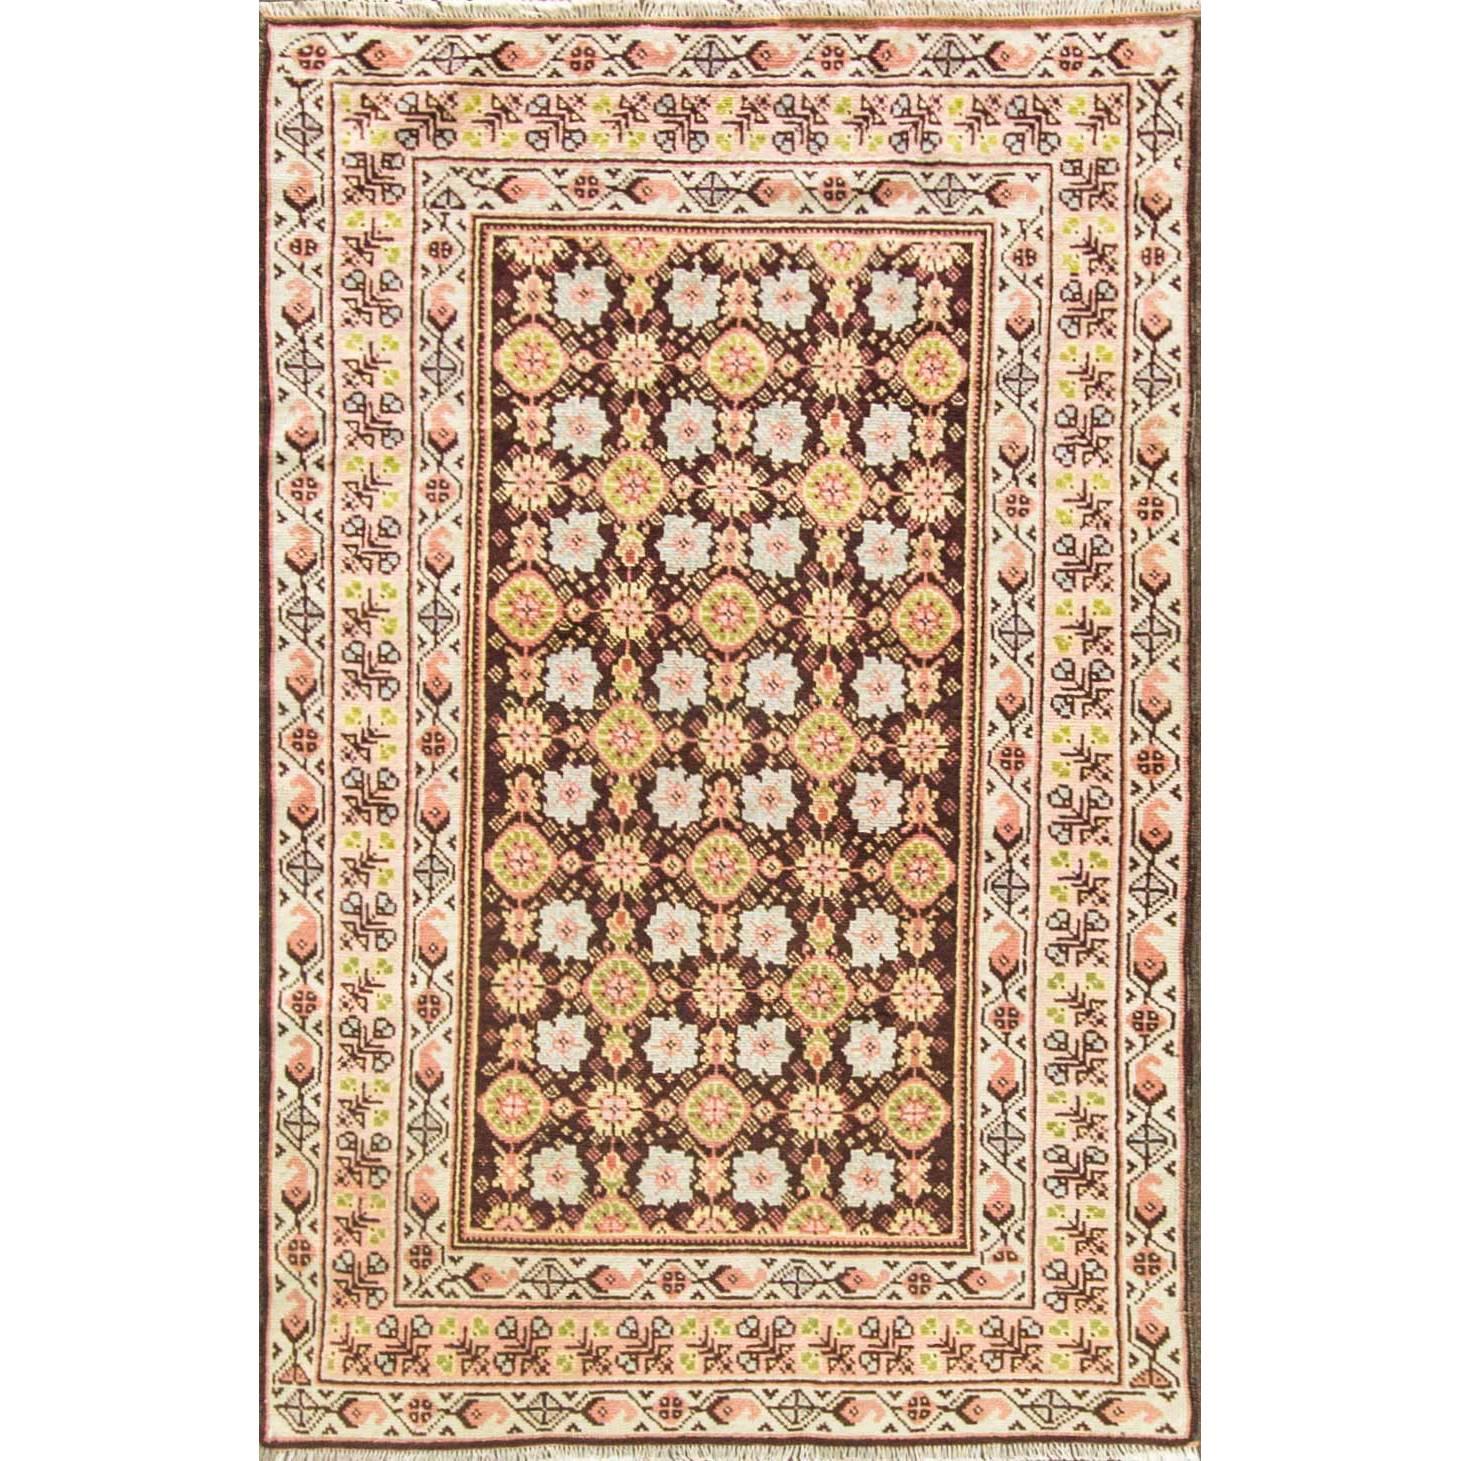  Antique Rug, Unusual, 3'4" x 6'6" For Sale